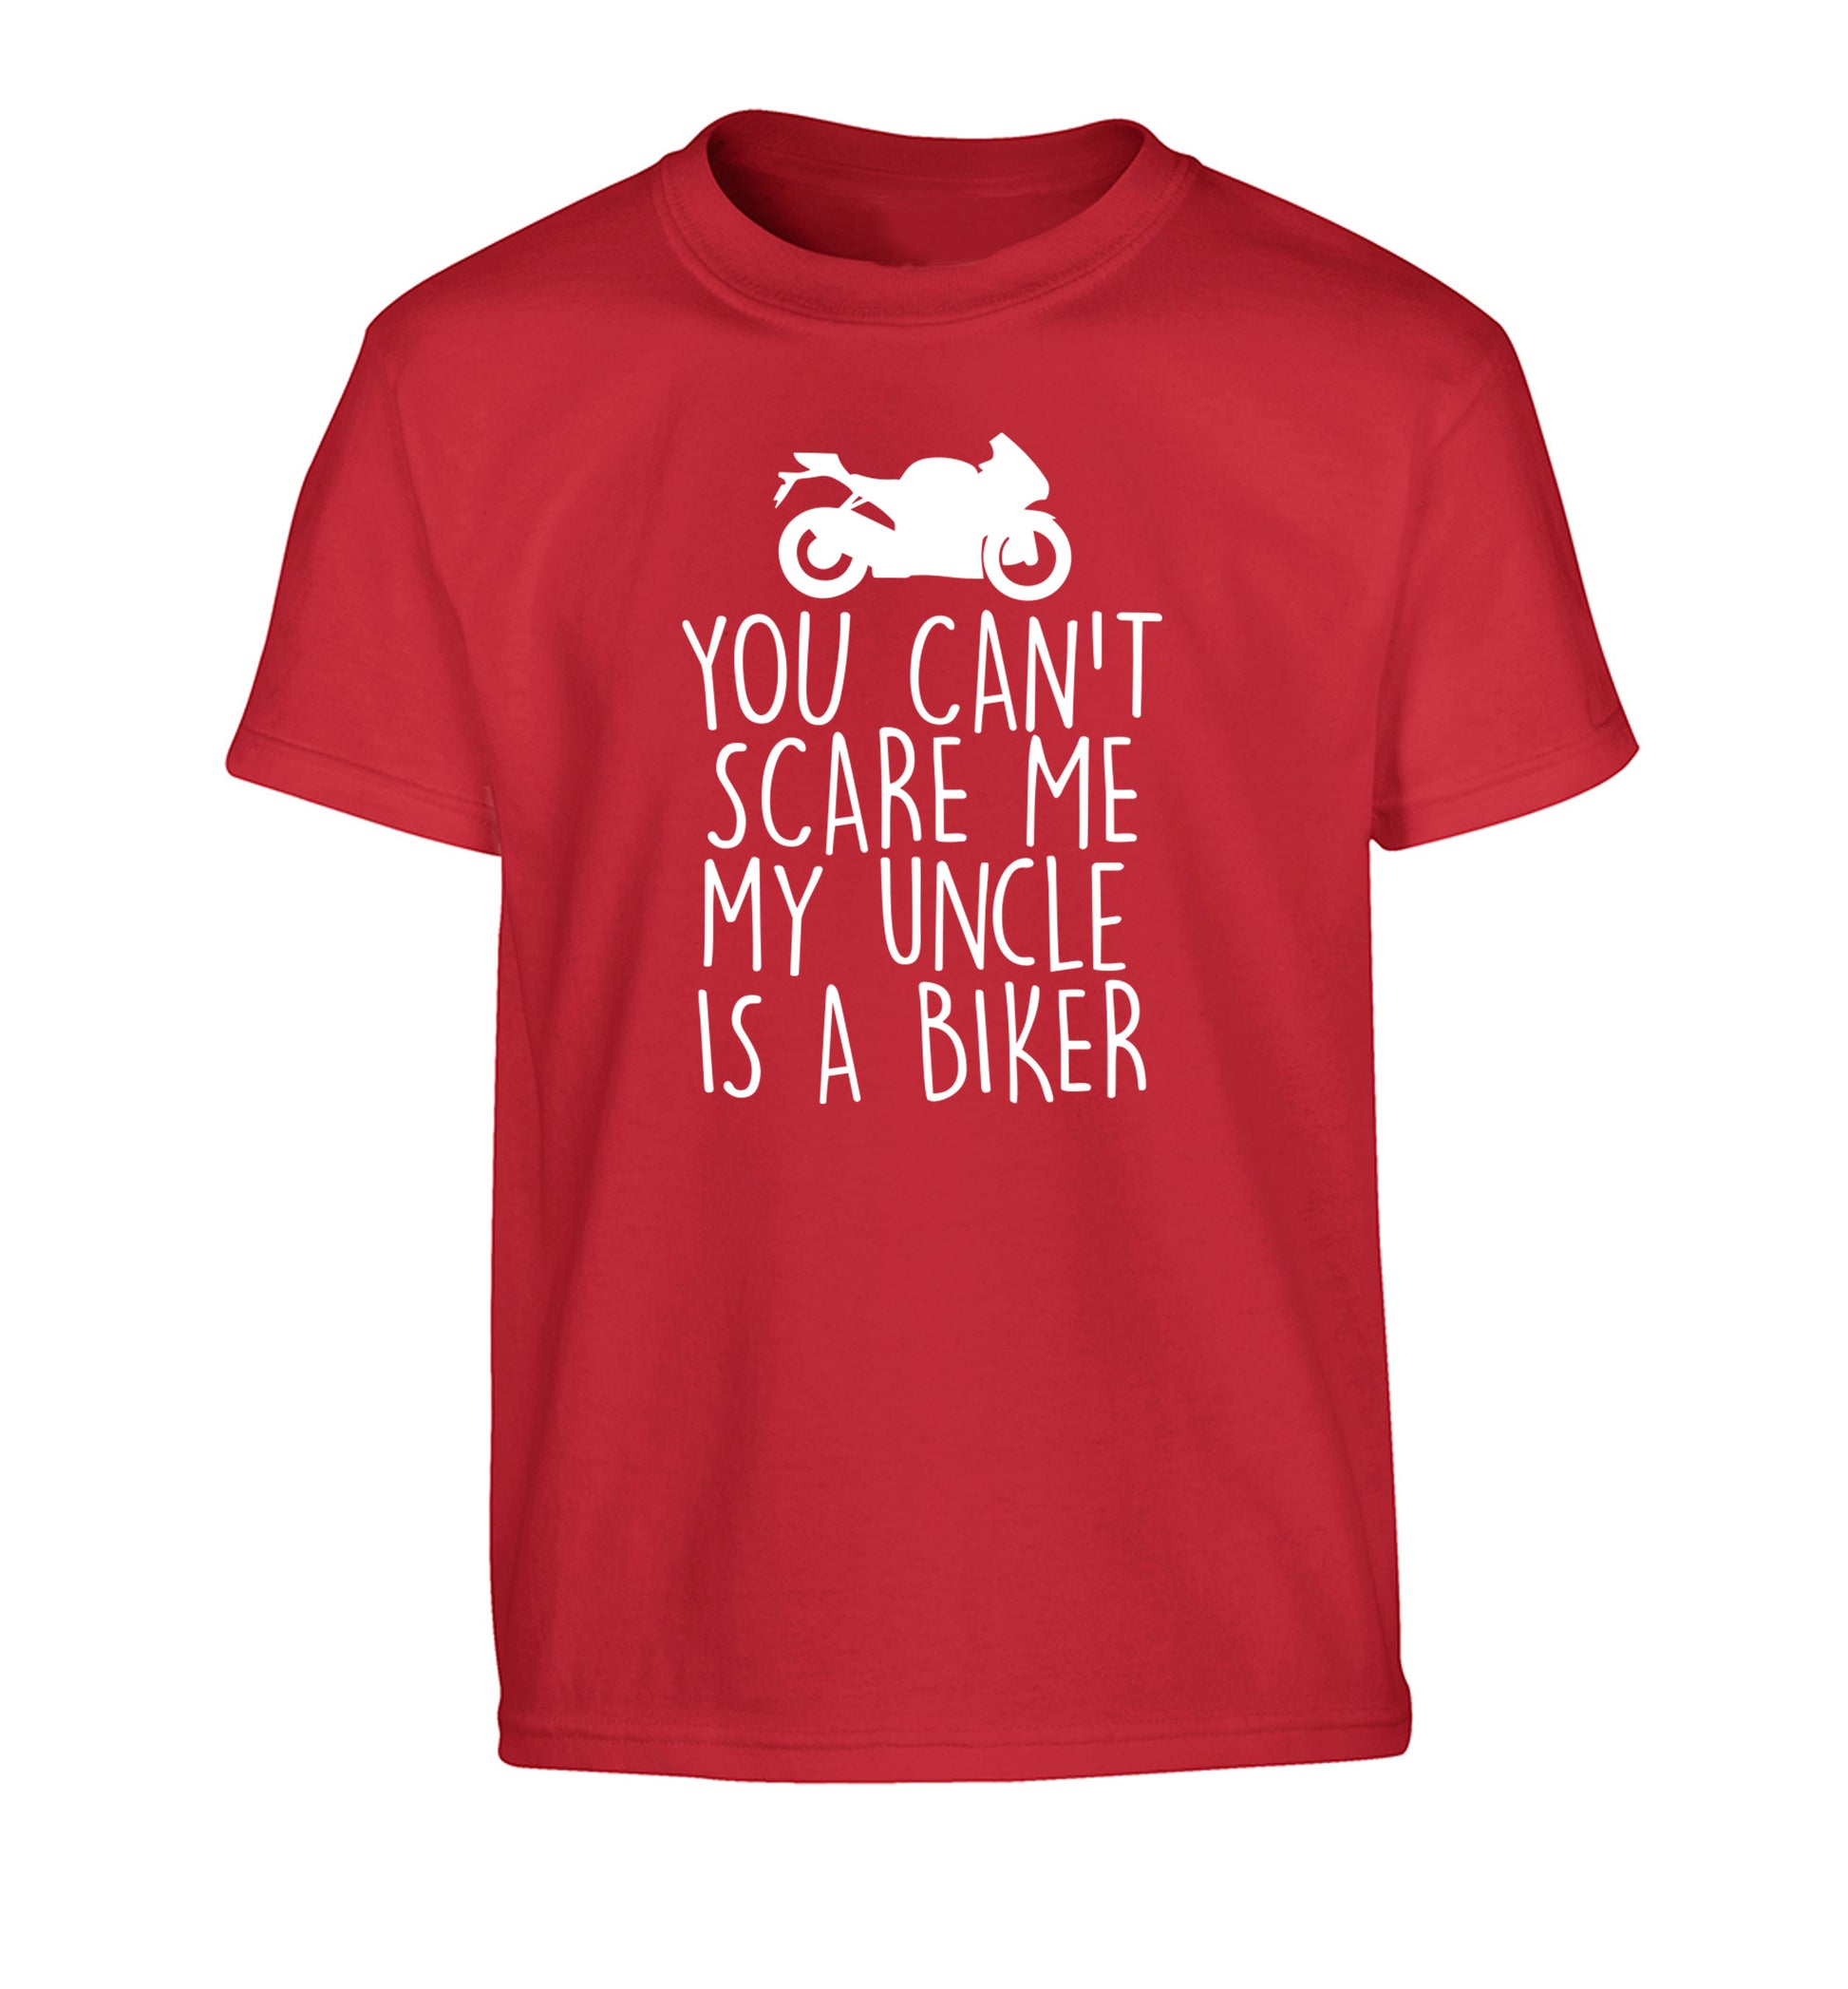 You can't scare me my uncle is a biker Children's red Tshirt 12-13 Years